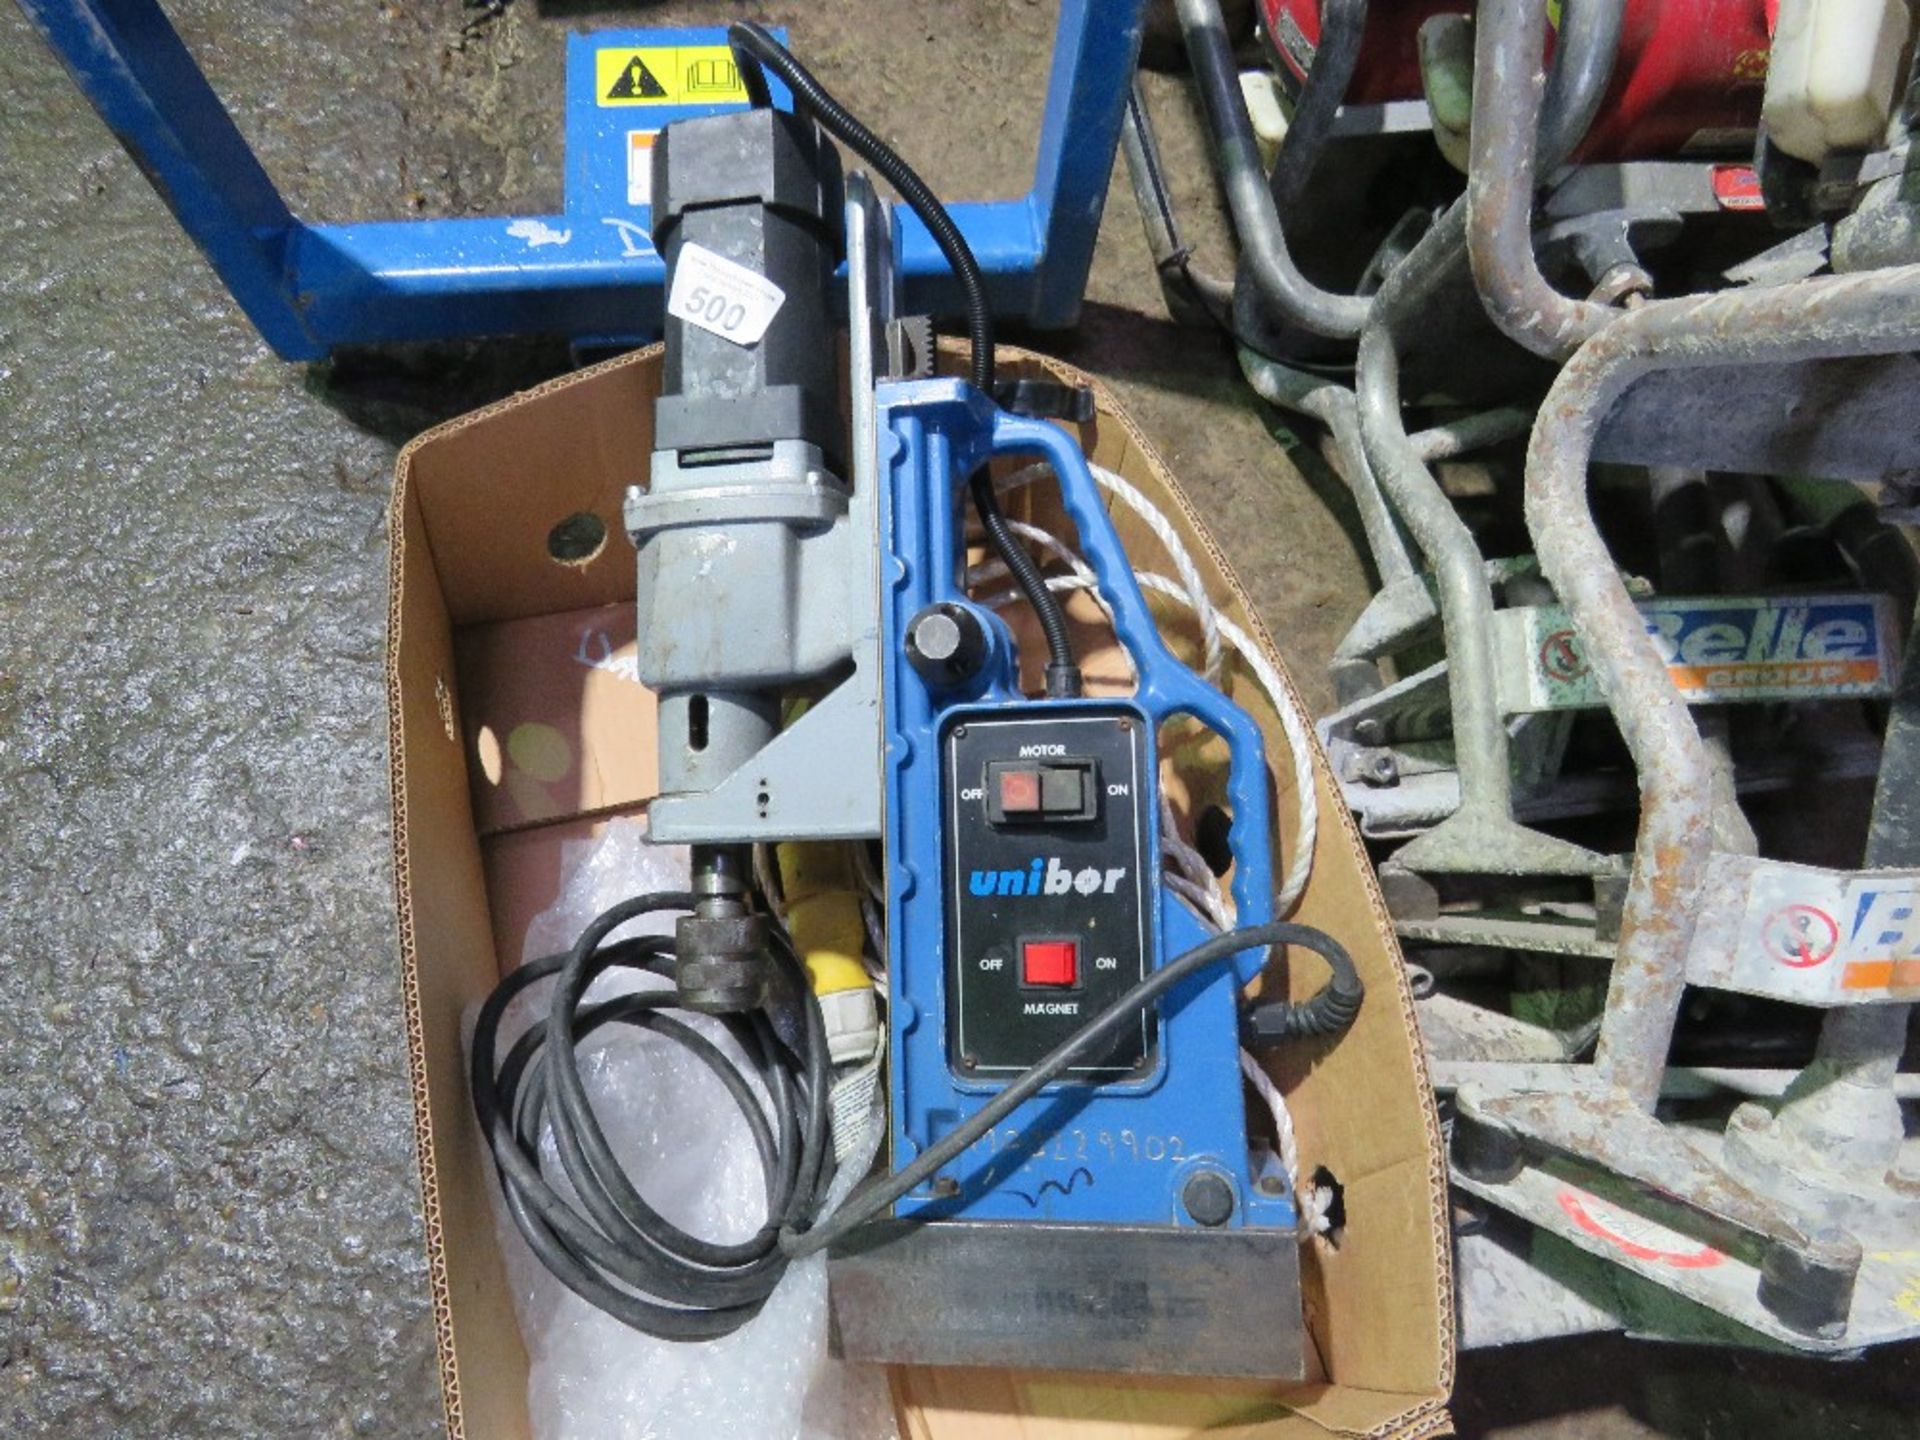 LARGE UNIBOR 110VOLT MAGNETIC DRILL. - Image 2 of 4